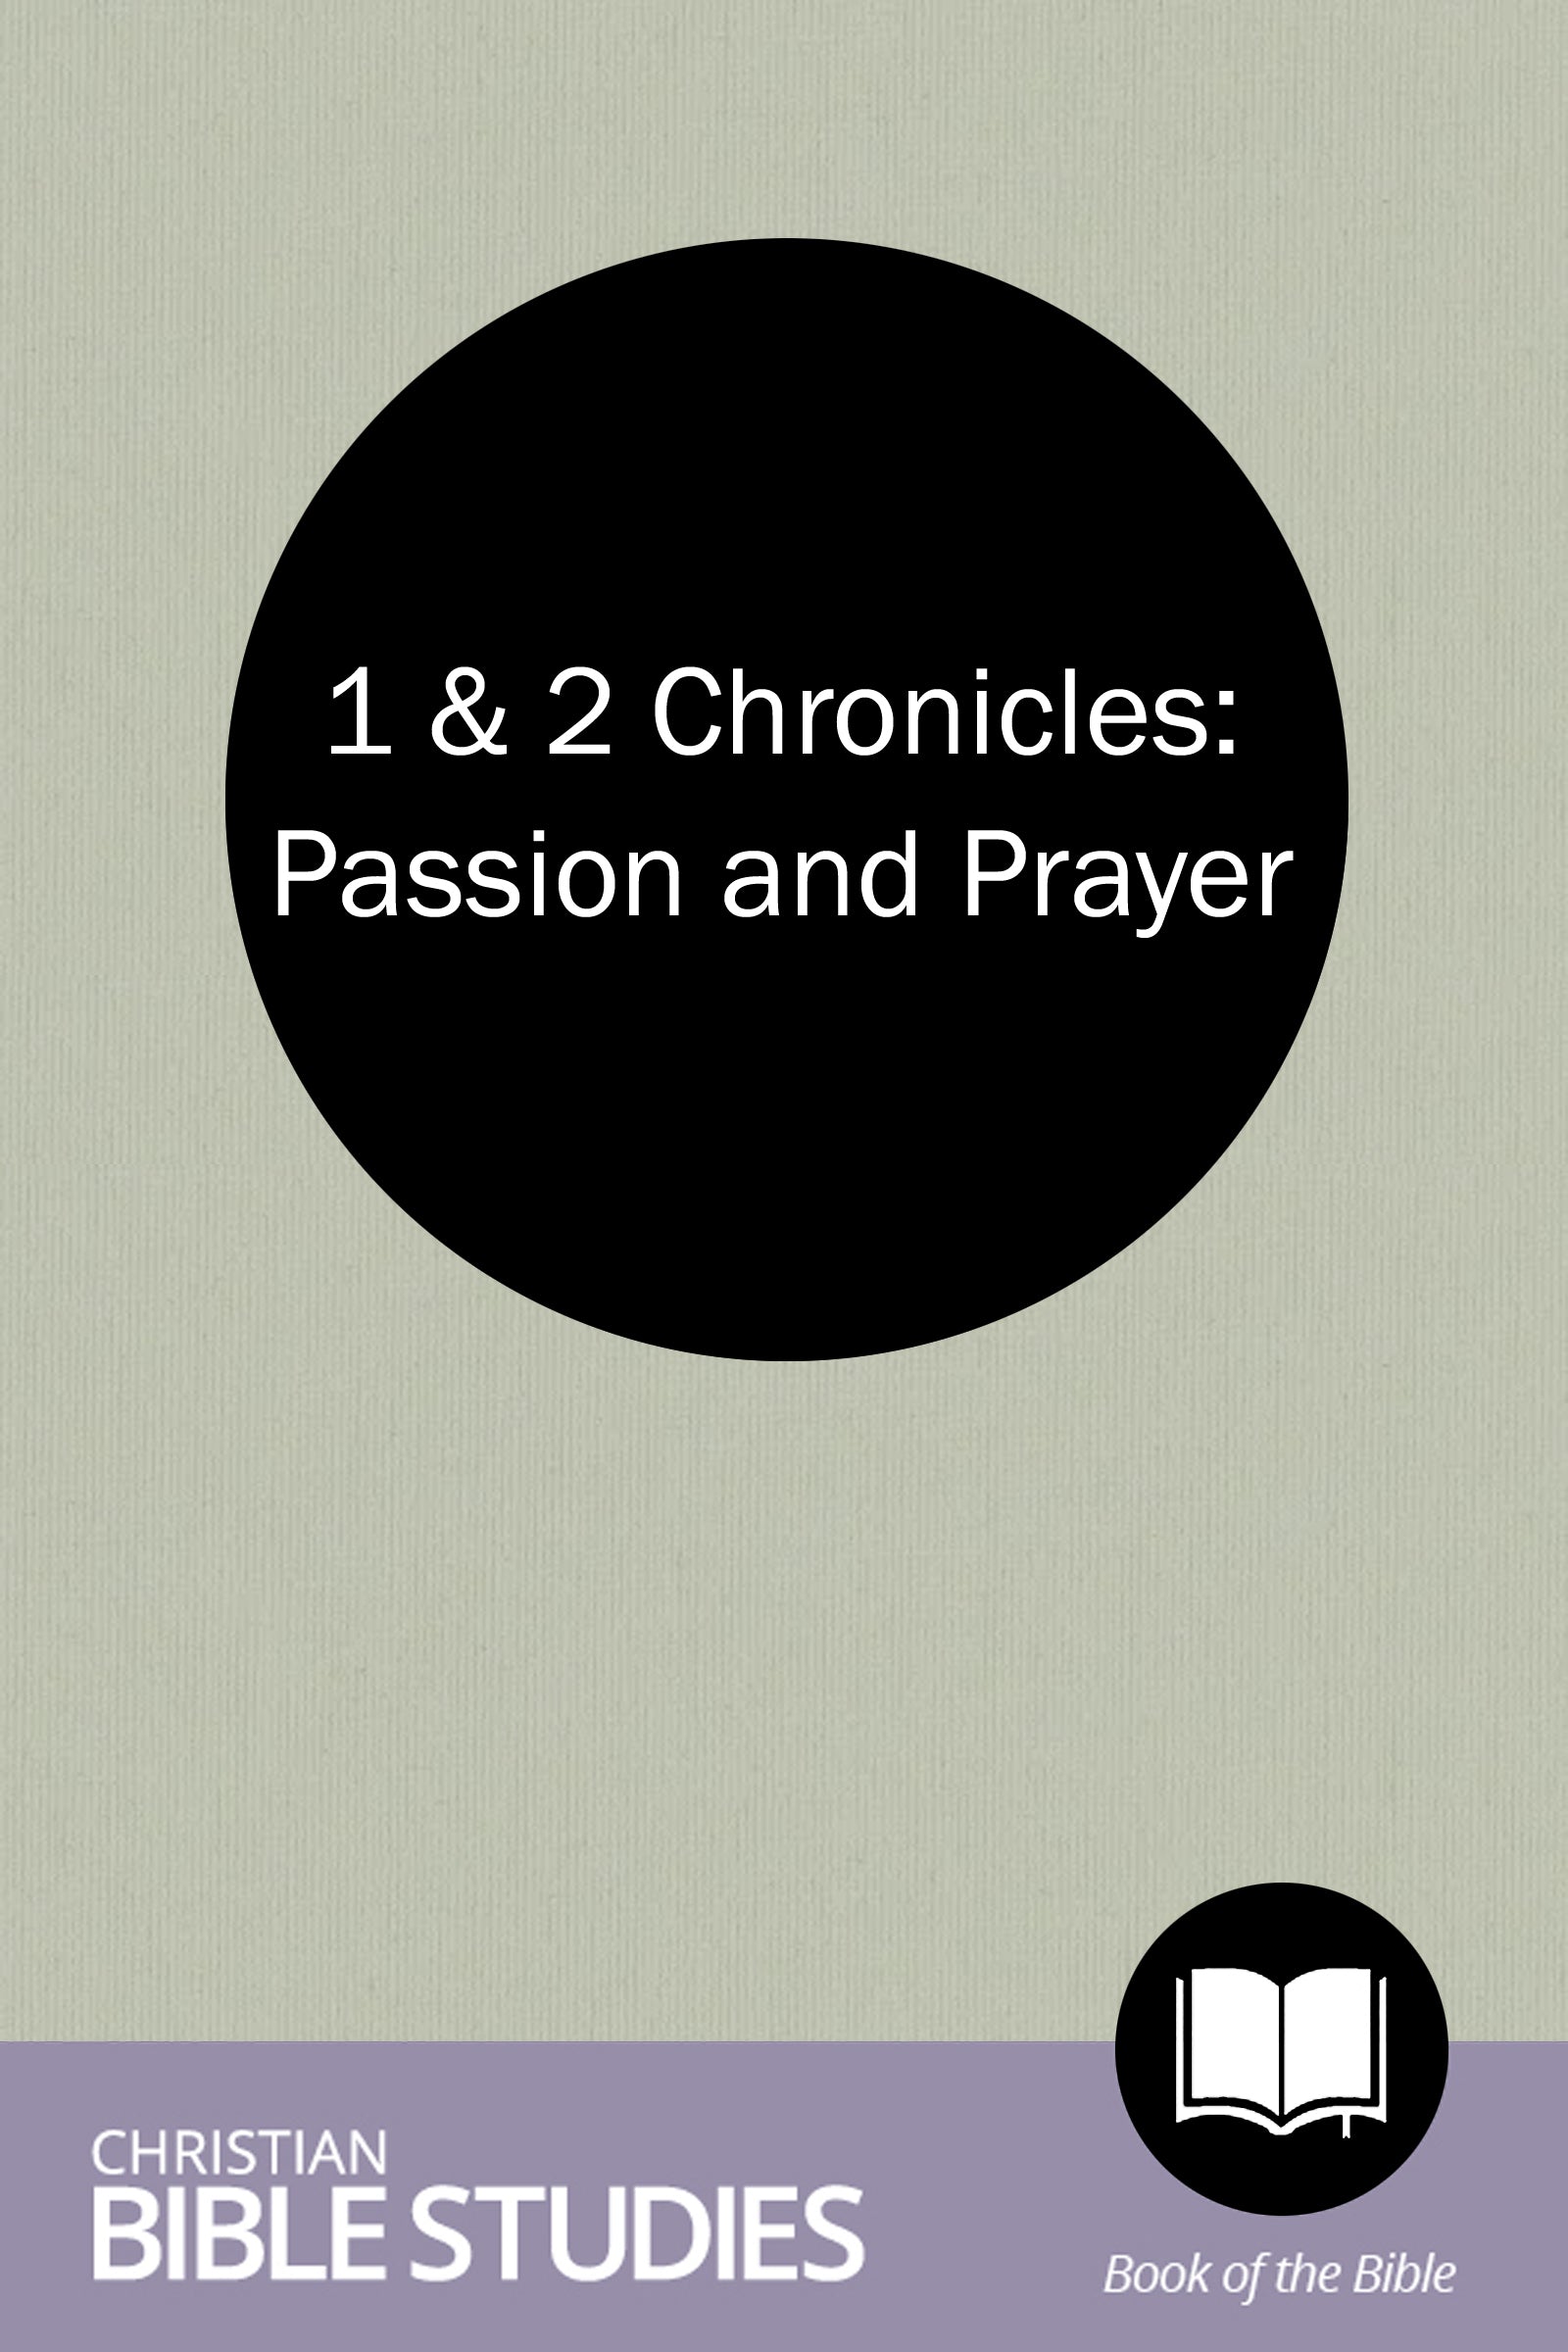 1 & 2 Chronicles: Passion and Prayer